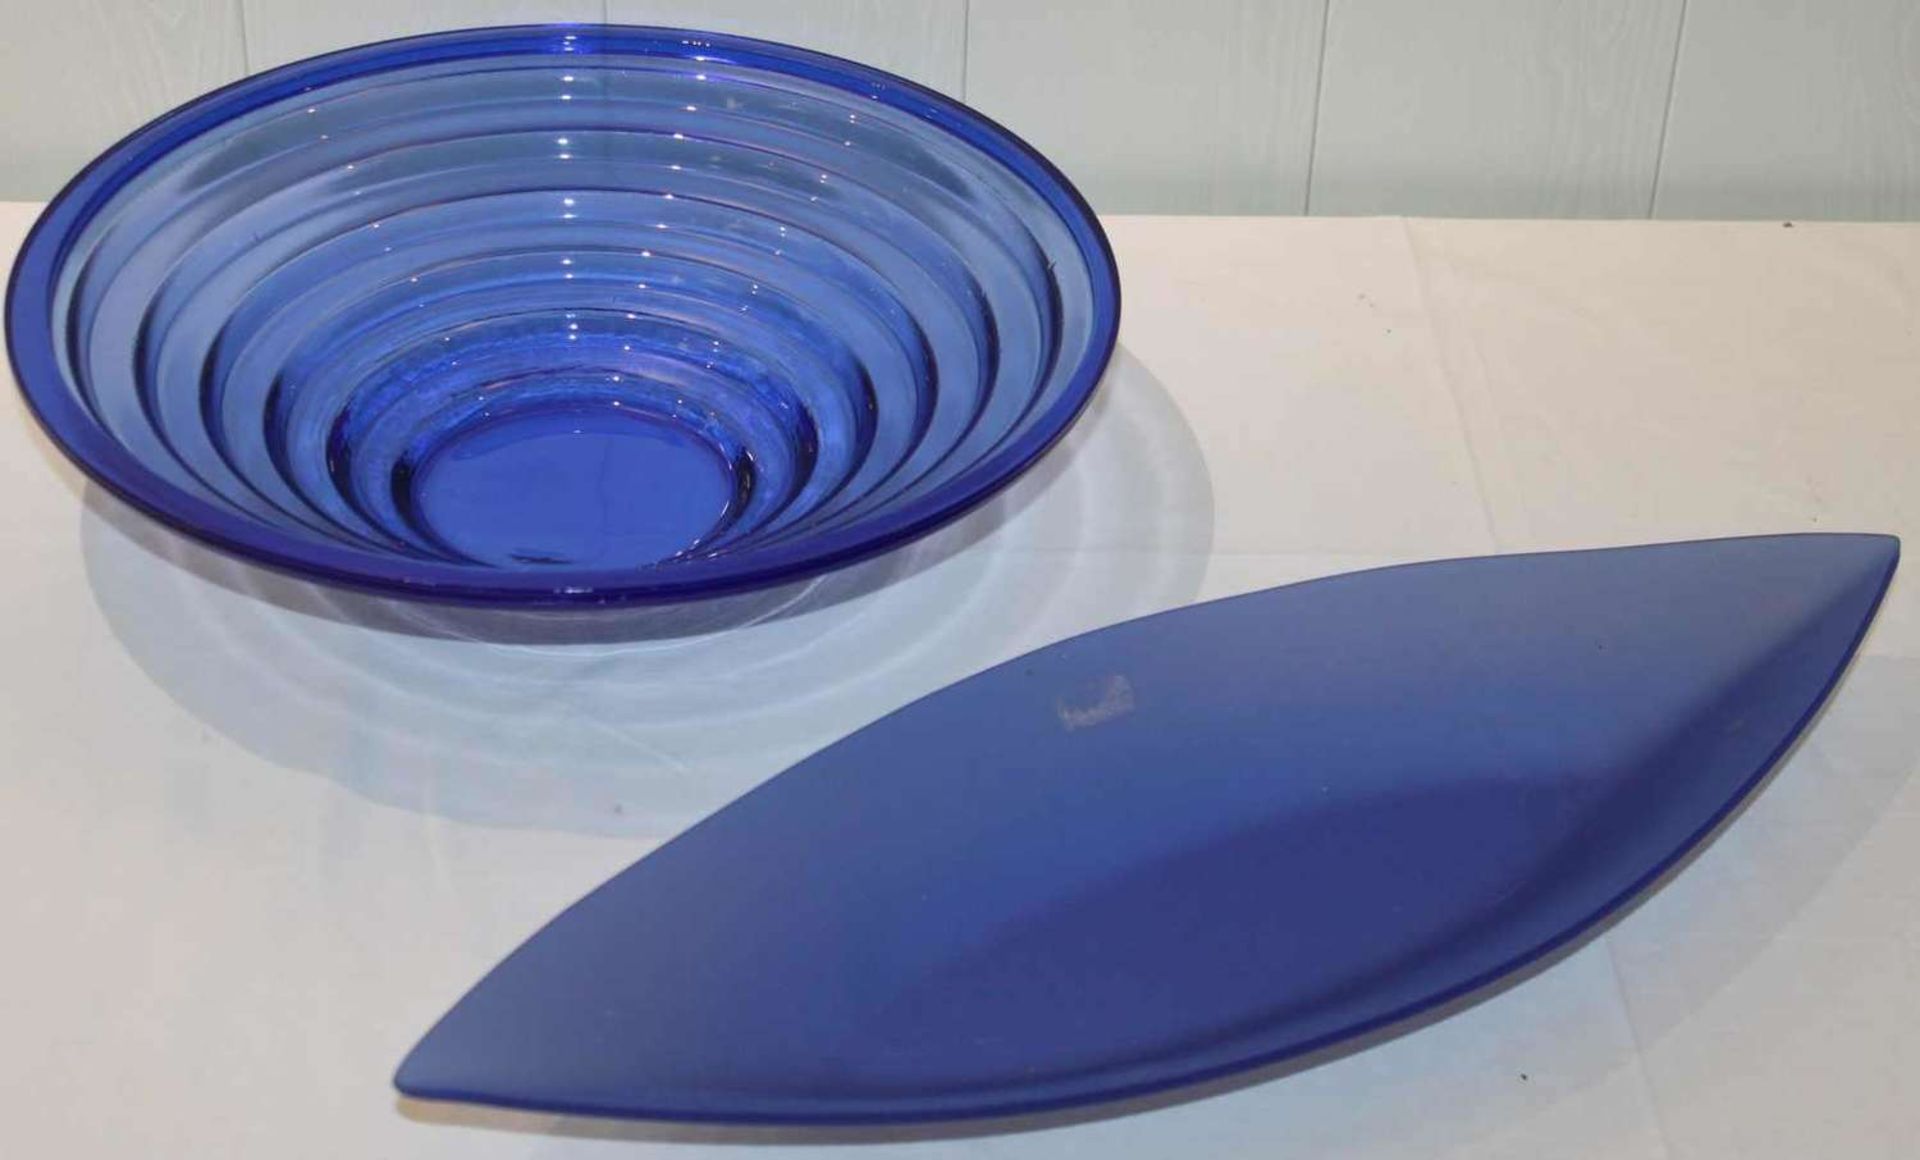 2 beautiful bowls made of glass, different designs. Both in blue